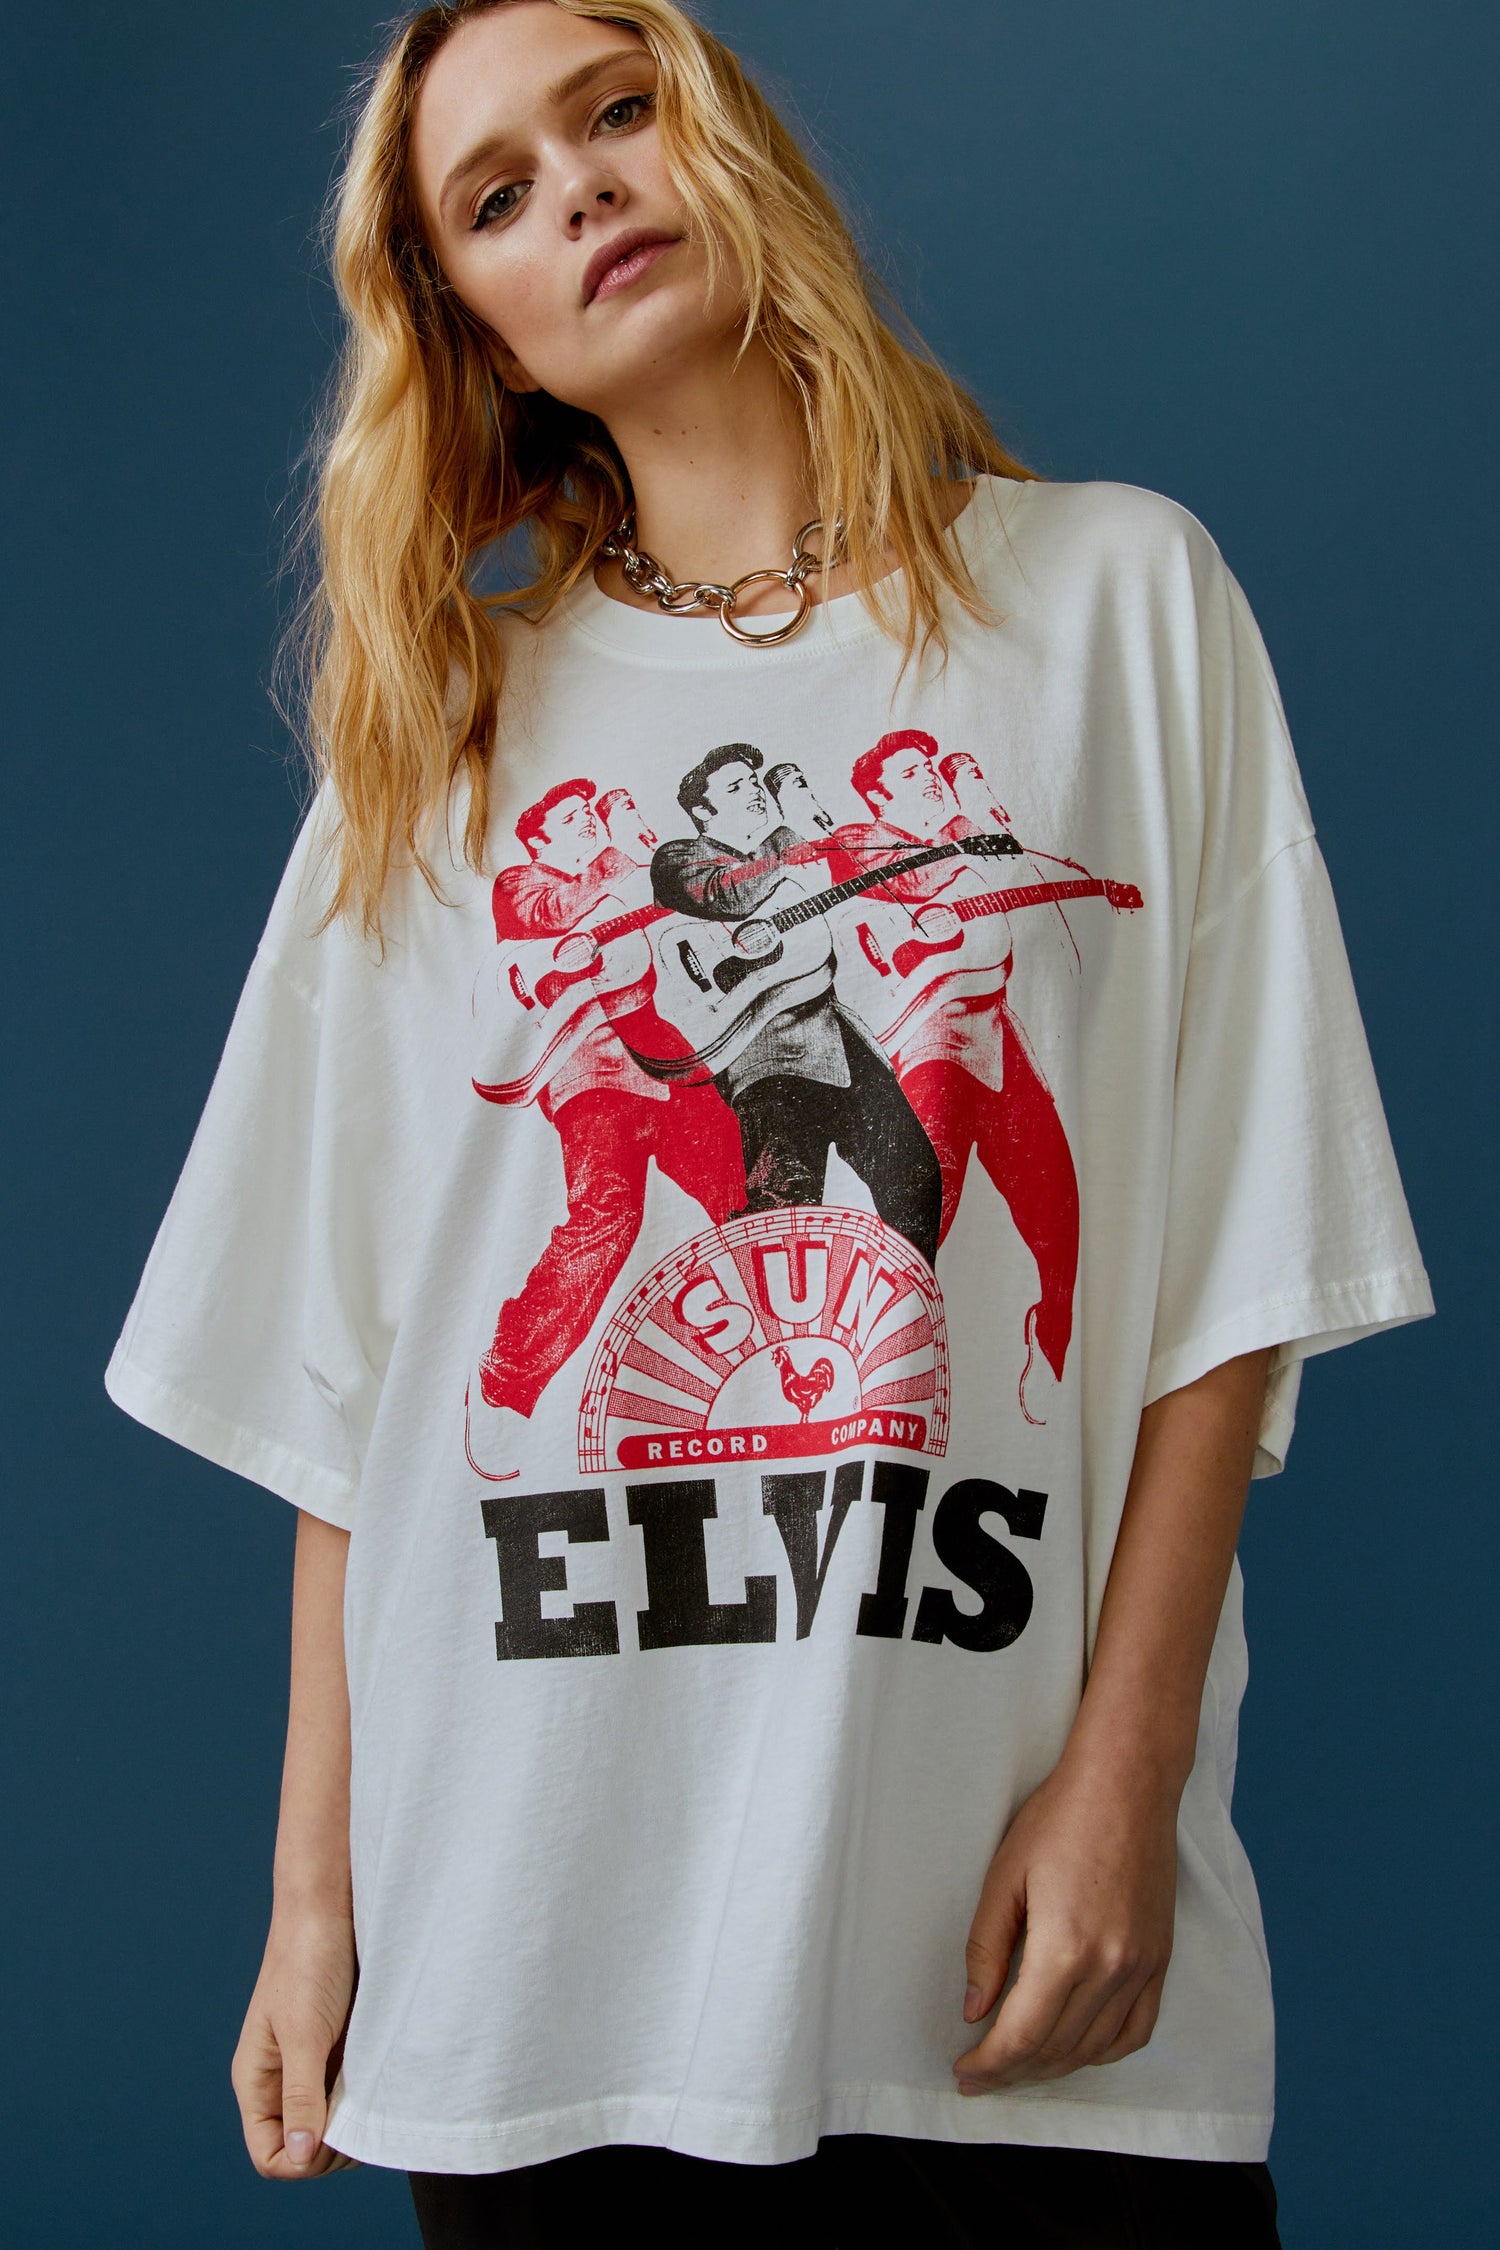 A blonde-haired model featuring a white tee stamped with the legendary artist's name and his iconic portrait in red and black inks.